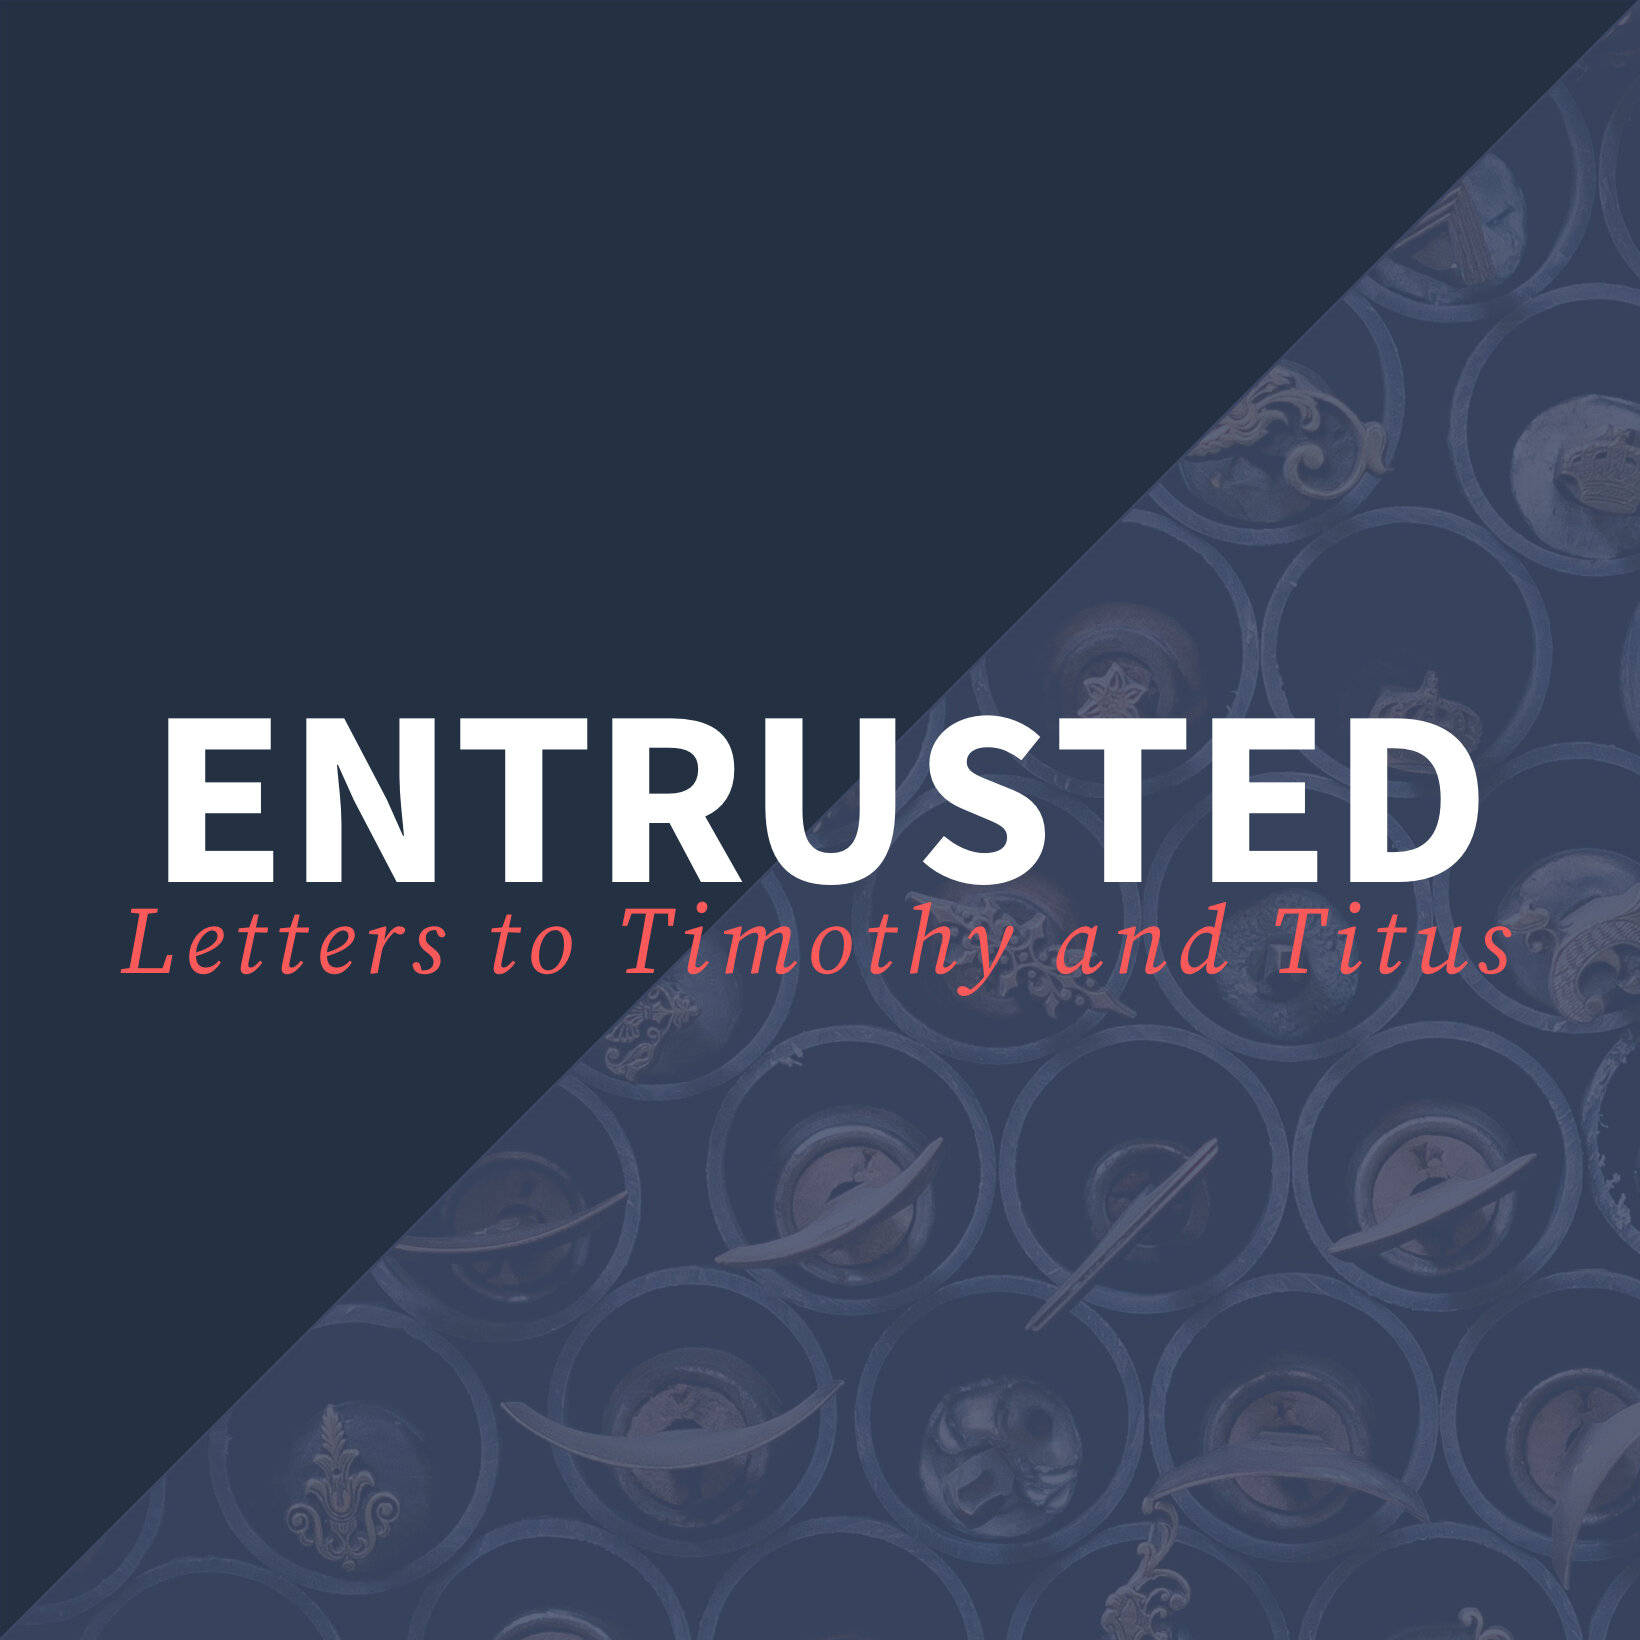 Entrusted: Letters to Timothy and Titus